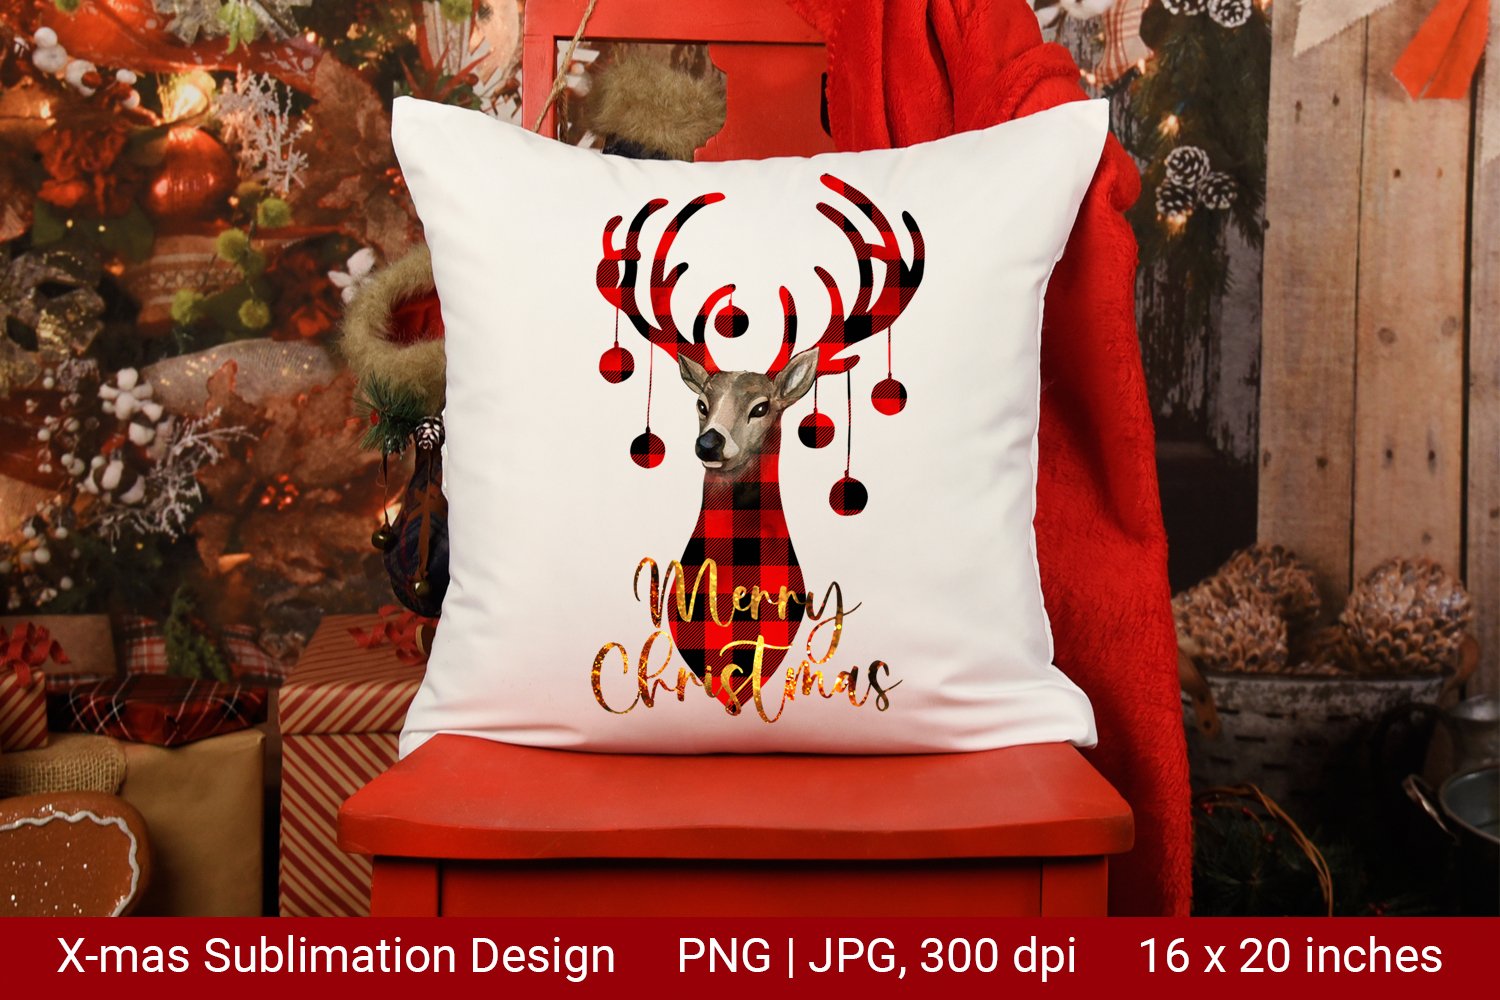 White pillow with colorful Christmas deer print.